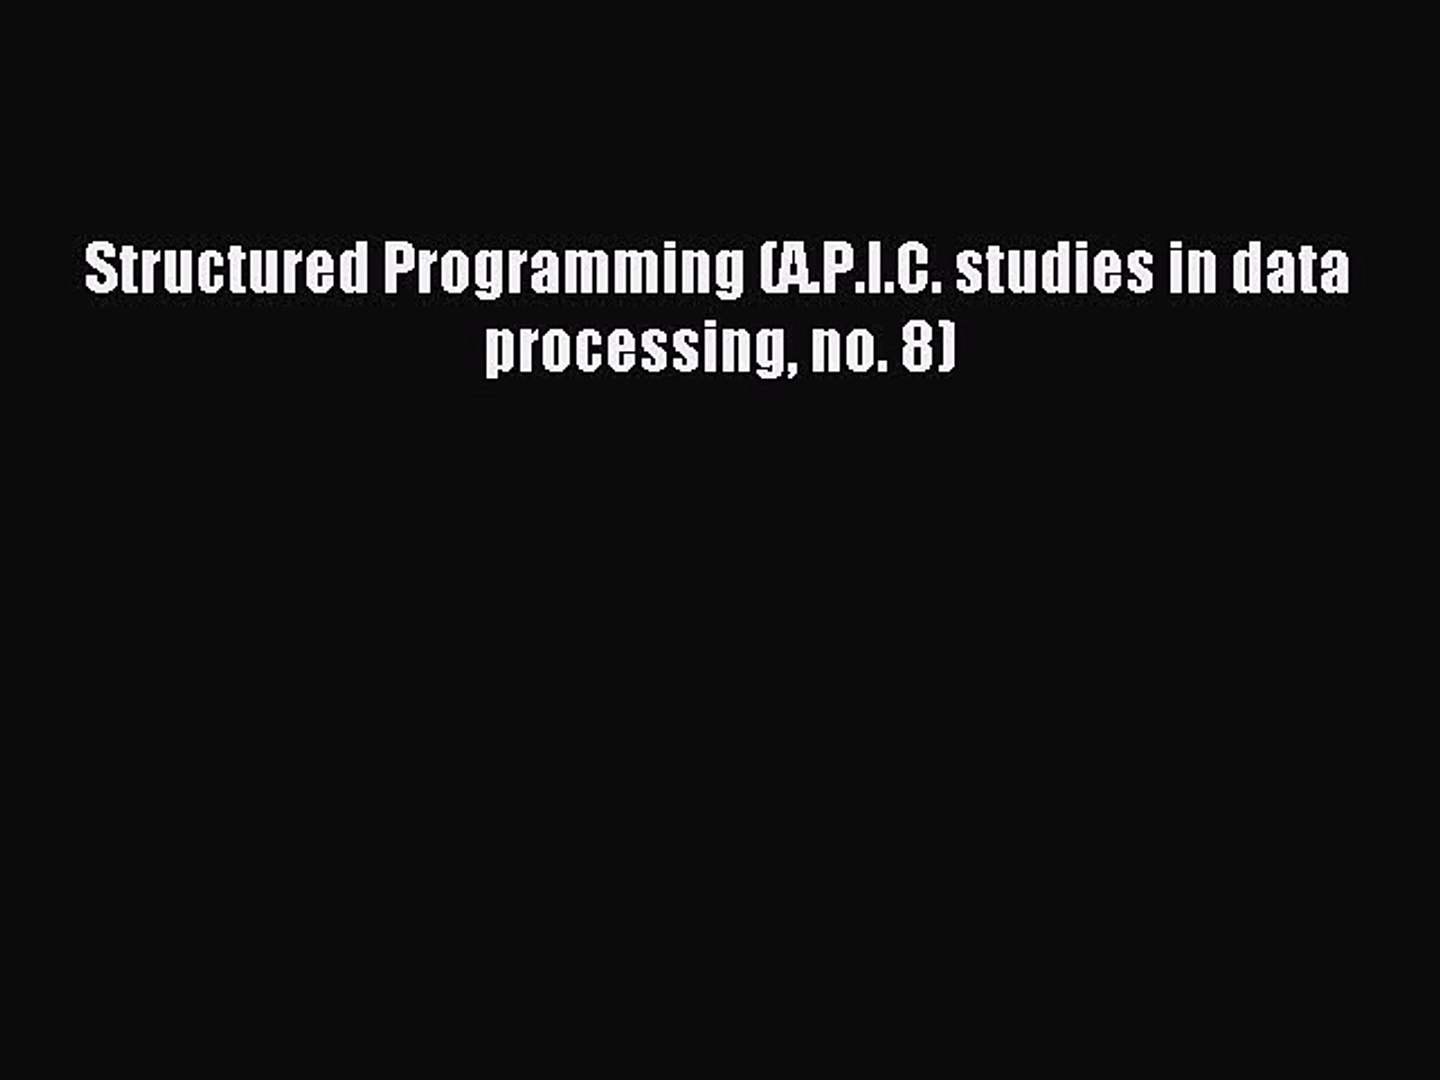 Download Structured Programming (A.P.I.C. studies in data processing no. 8) PDF Free